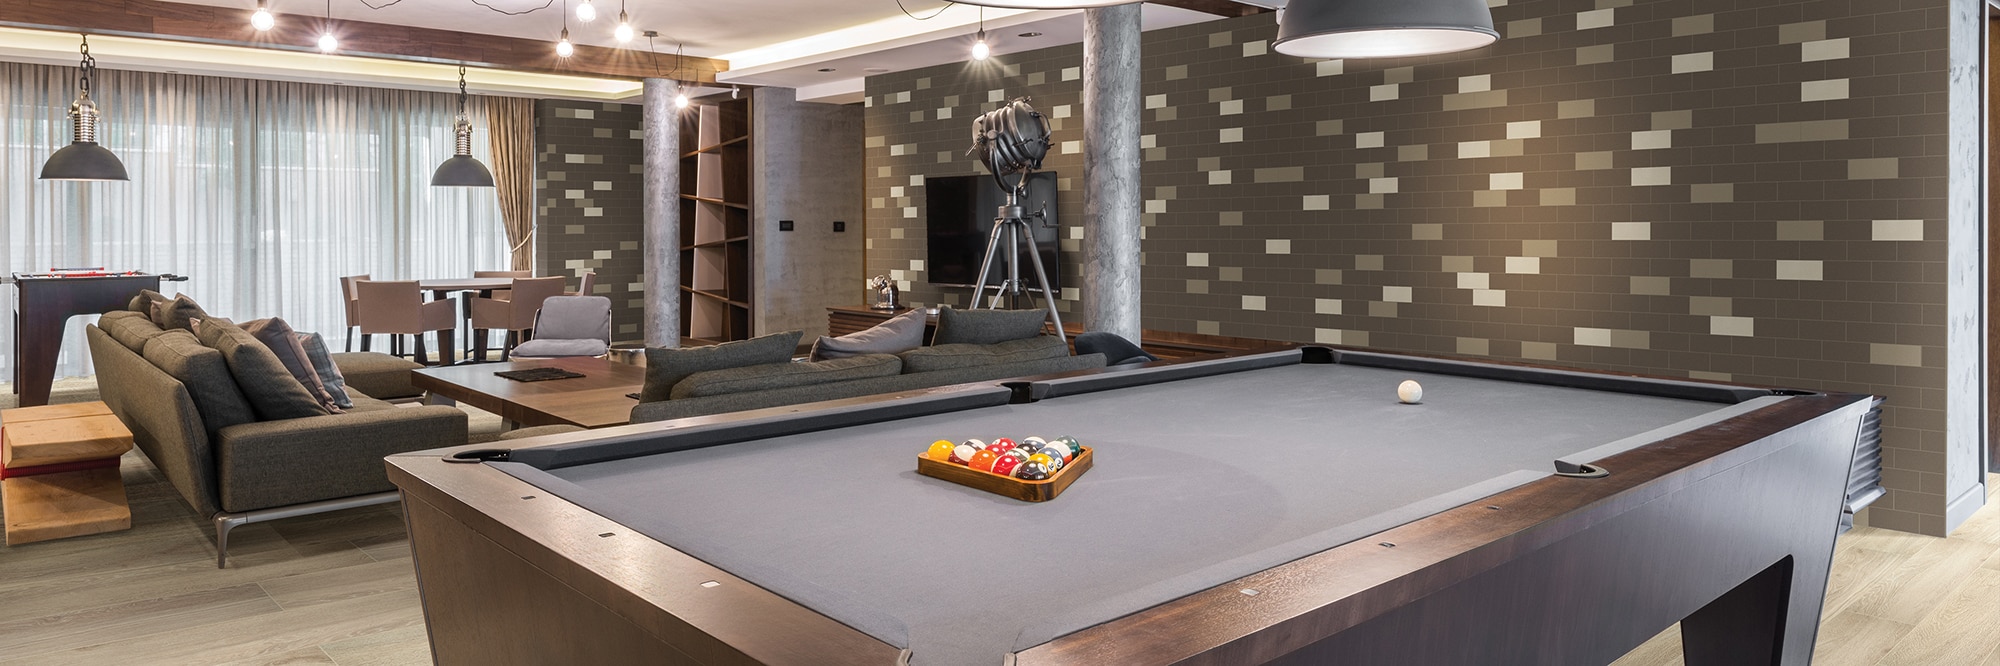 Game room with gray felt billiard table, floor tile that looks like wood, white, tan & brown subway tile, wood beam ceiling, and brown over-stuffed couches.